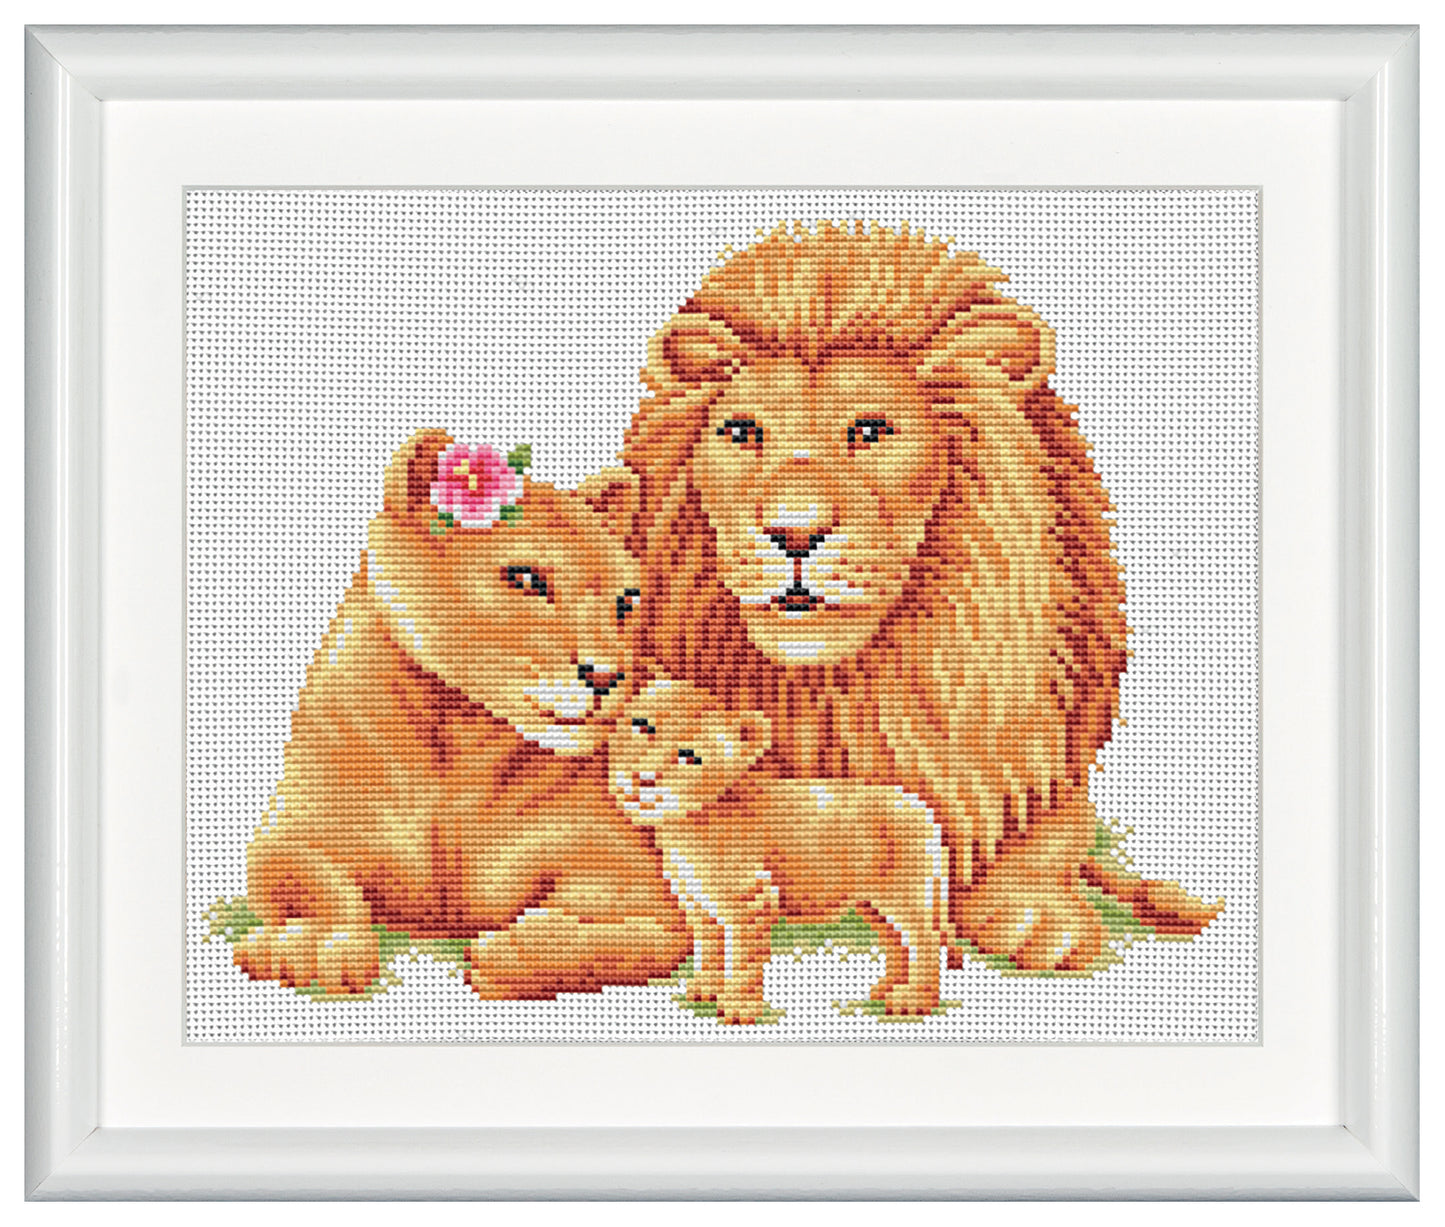 This beautiful design that comprises a lion family of three. Lion parents look so happy and proud with their young one. a Bright flower placed next to the lioness ear for a touch a of pink. DSB cross stitch kits have easy to follow design charts and contain all items needed to facilitate embroidery without hassle. To cater to both beginners as well as advanced stitching artists.